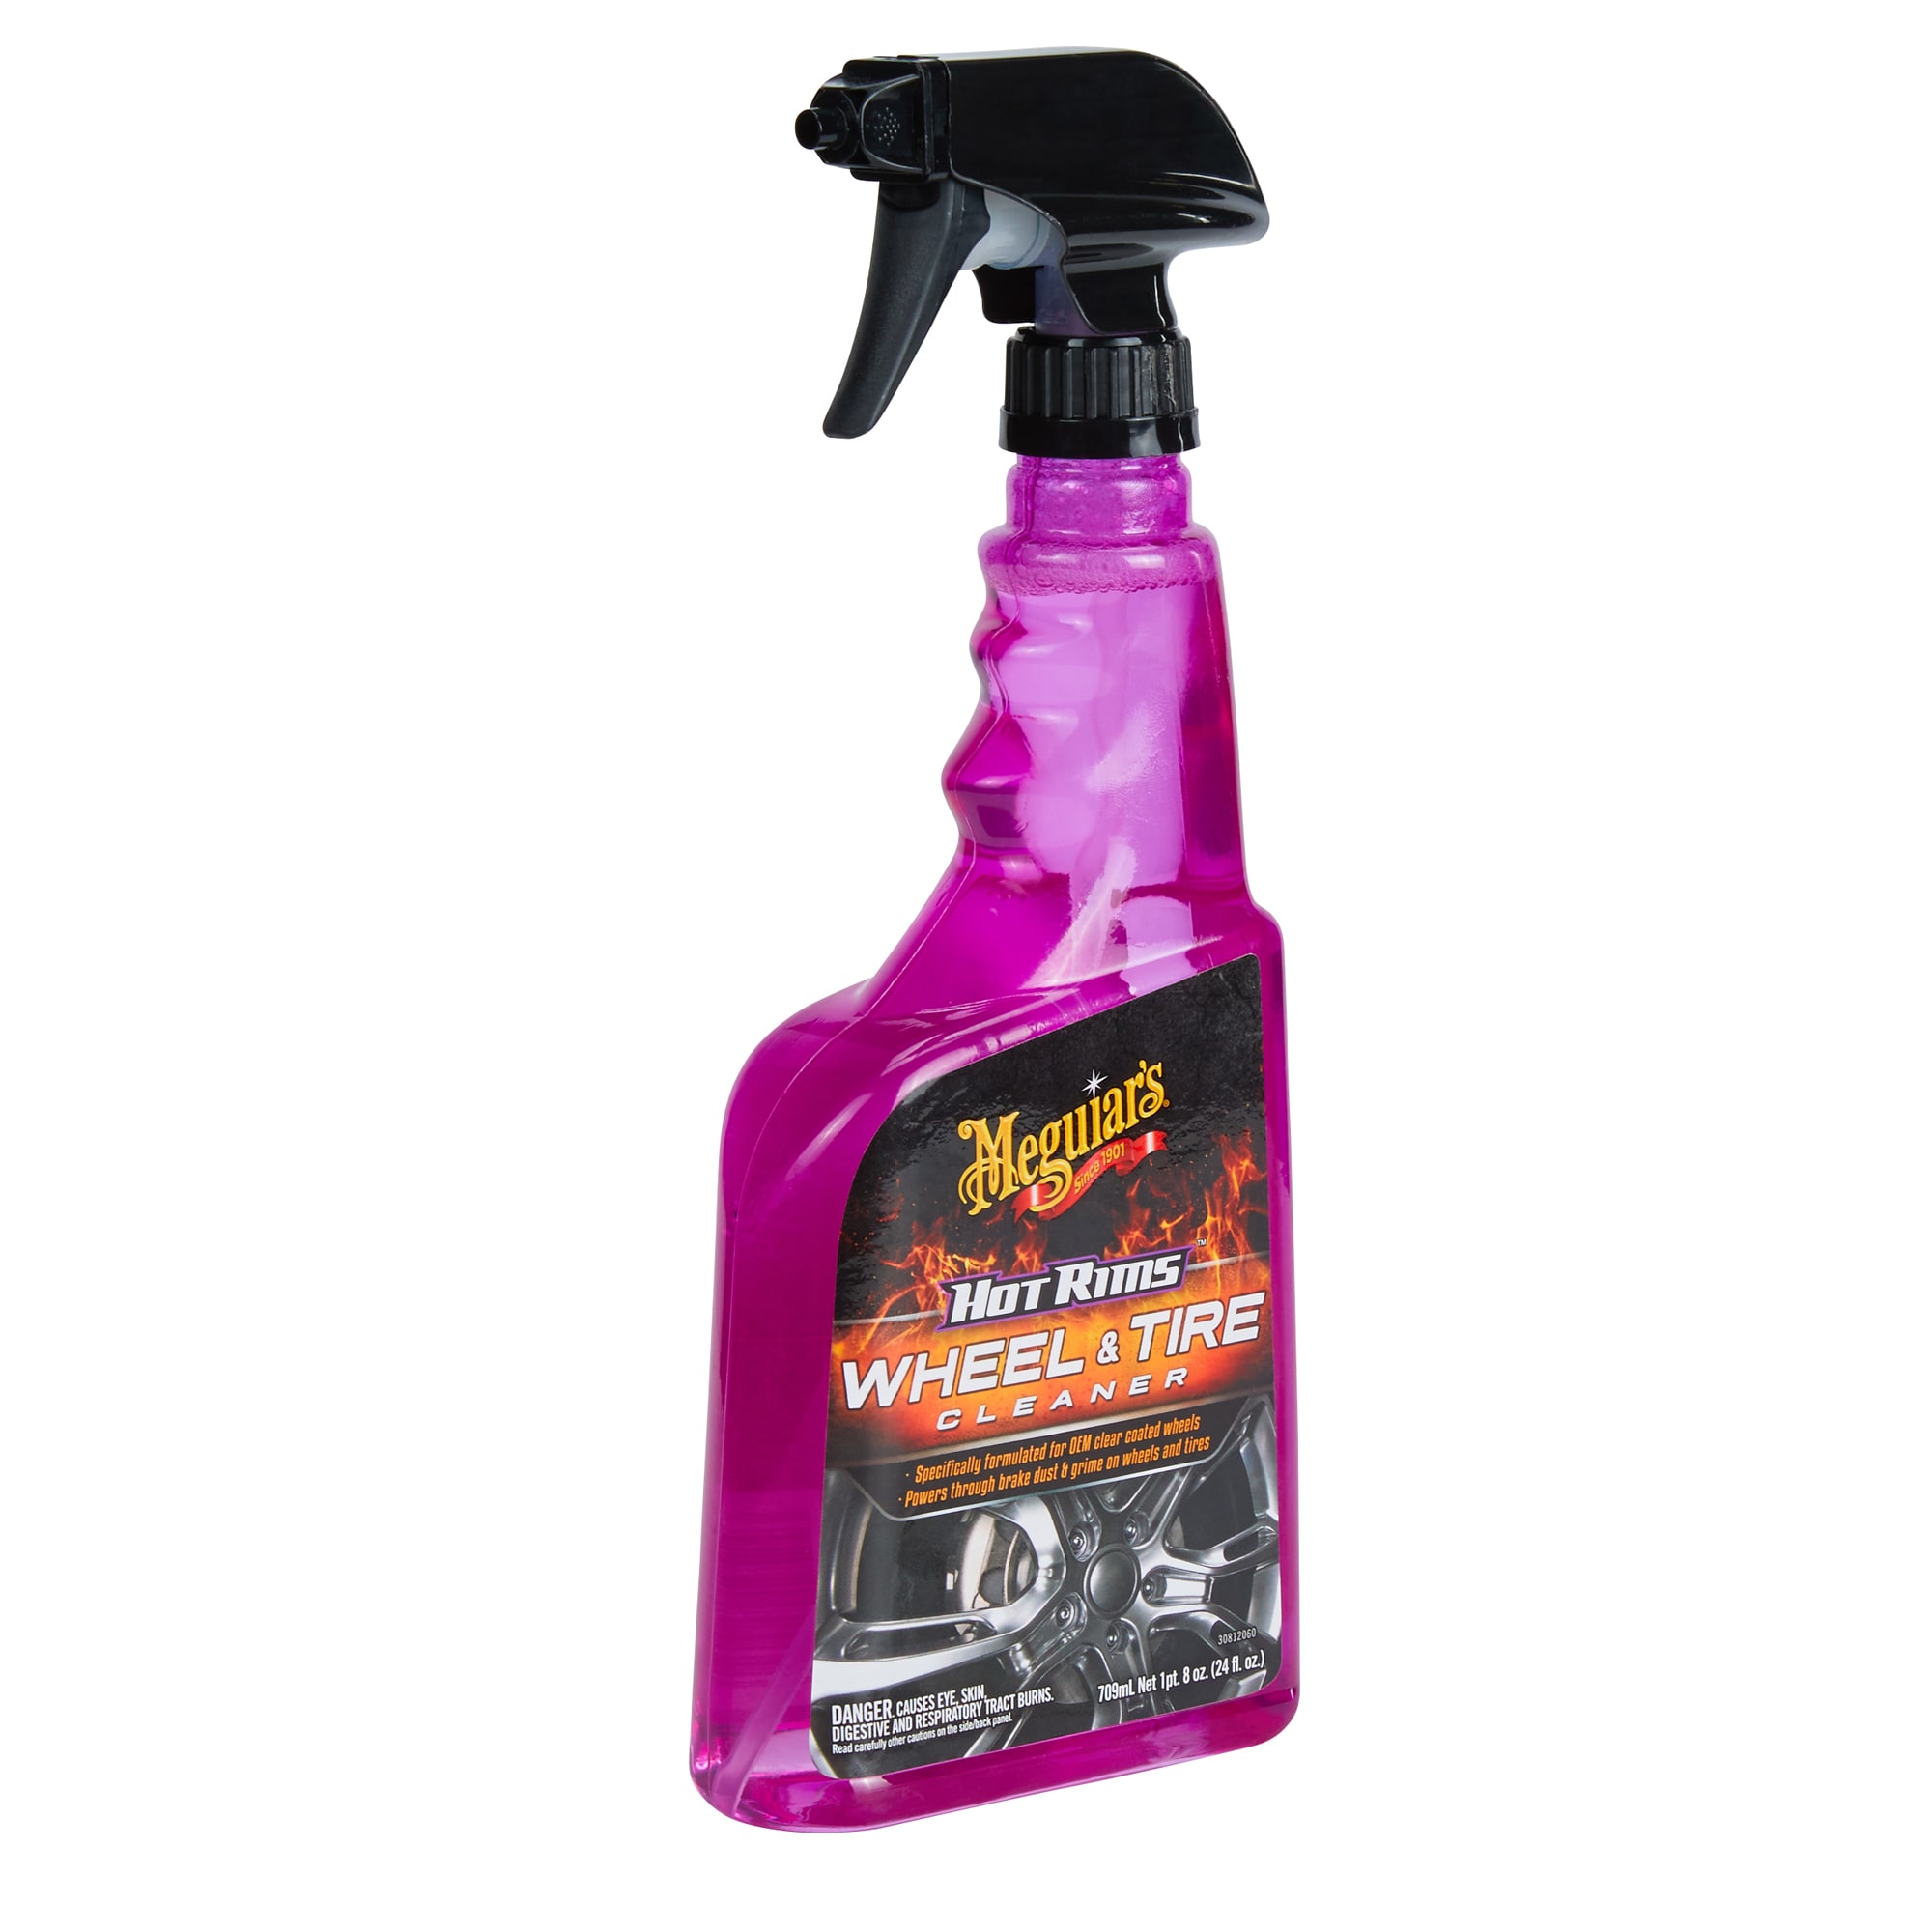 Wheel and Tire Cleaner Meguiar's Hot Rims, 473ml - G9524 - Pro Detailing